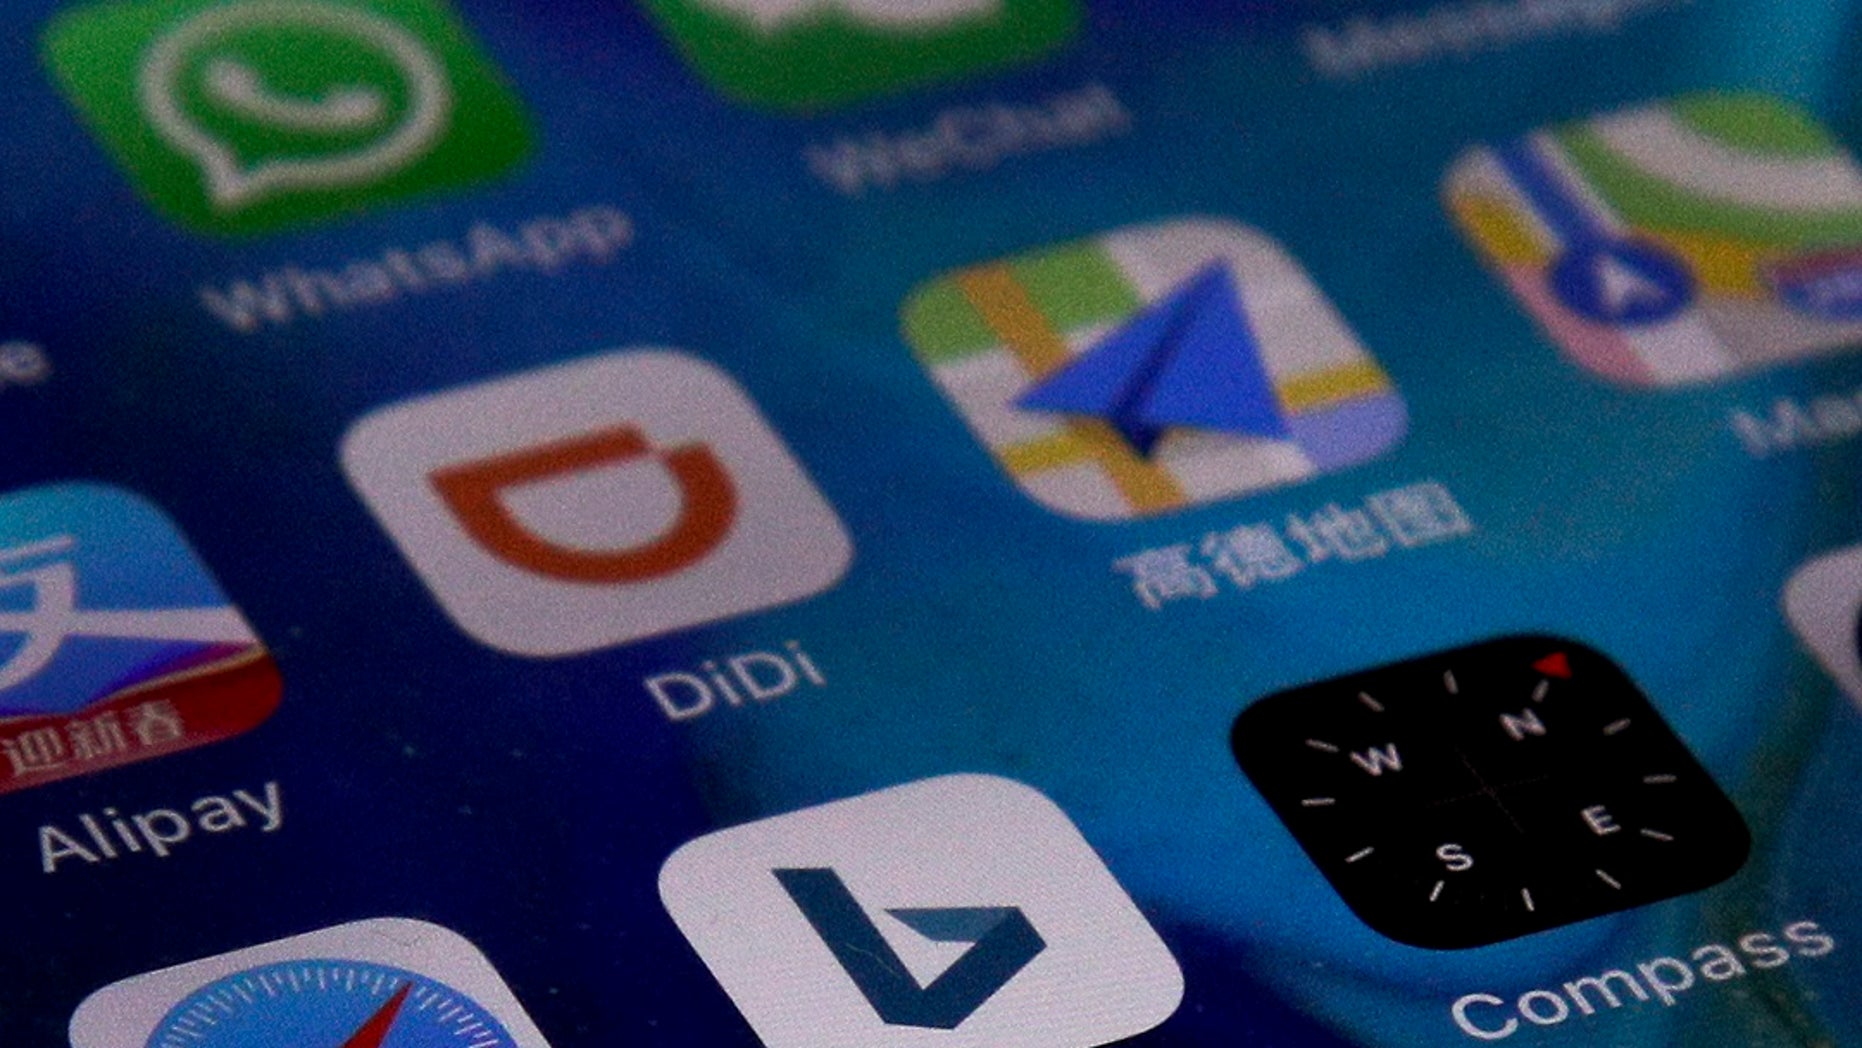 Access to Bing in China restored after temporary disruption